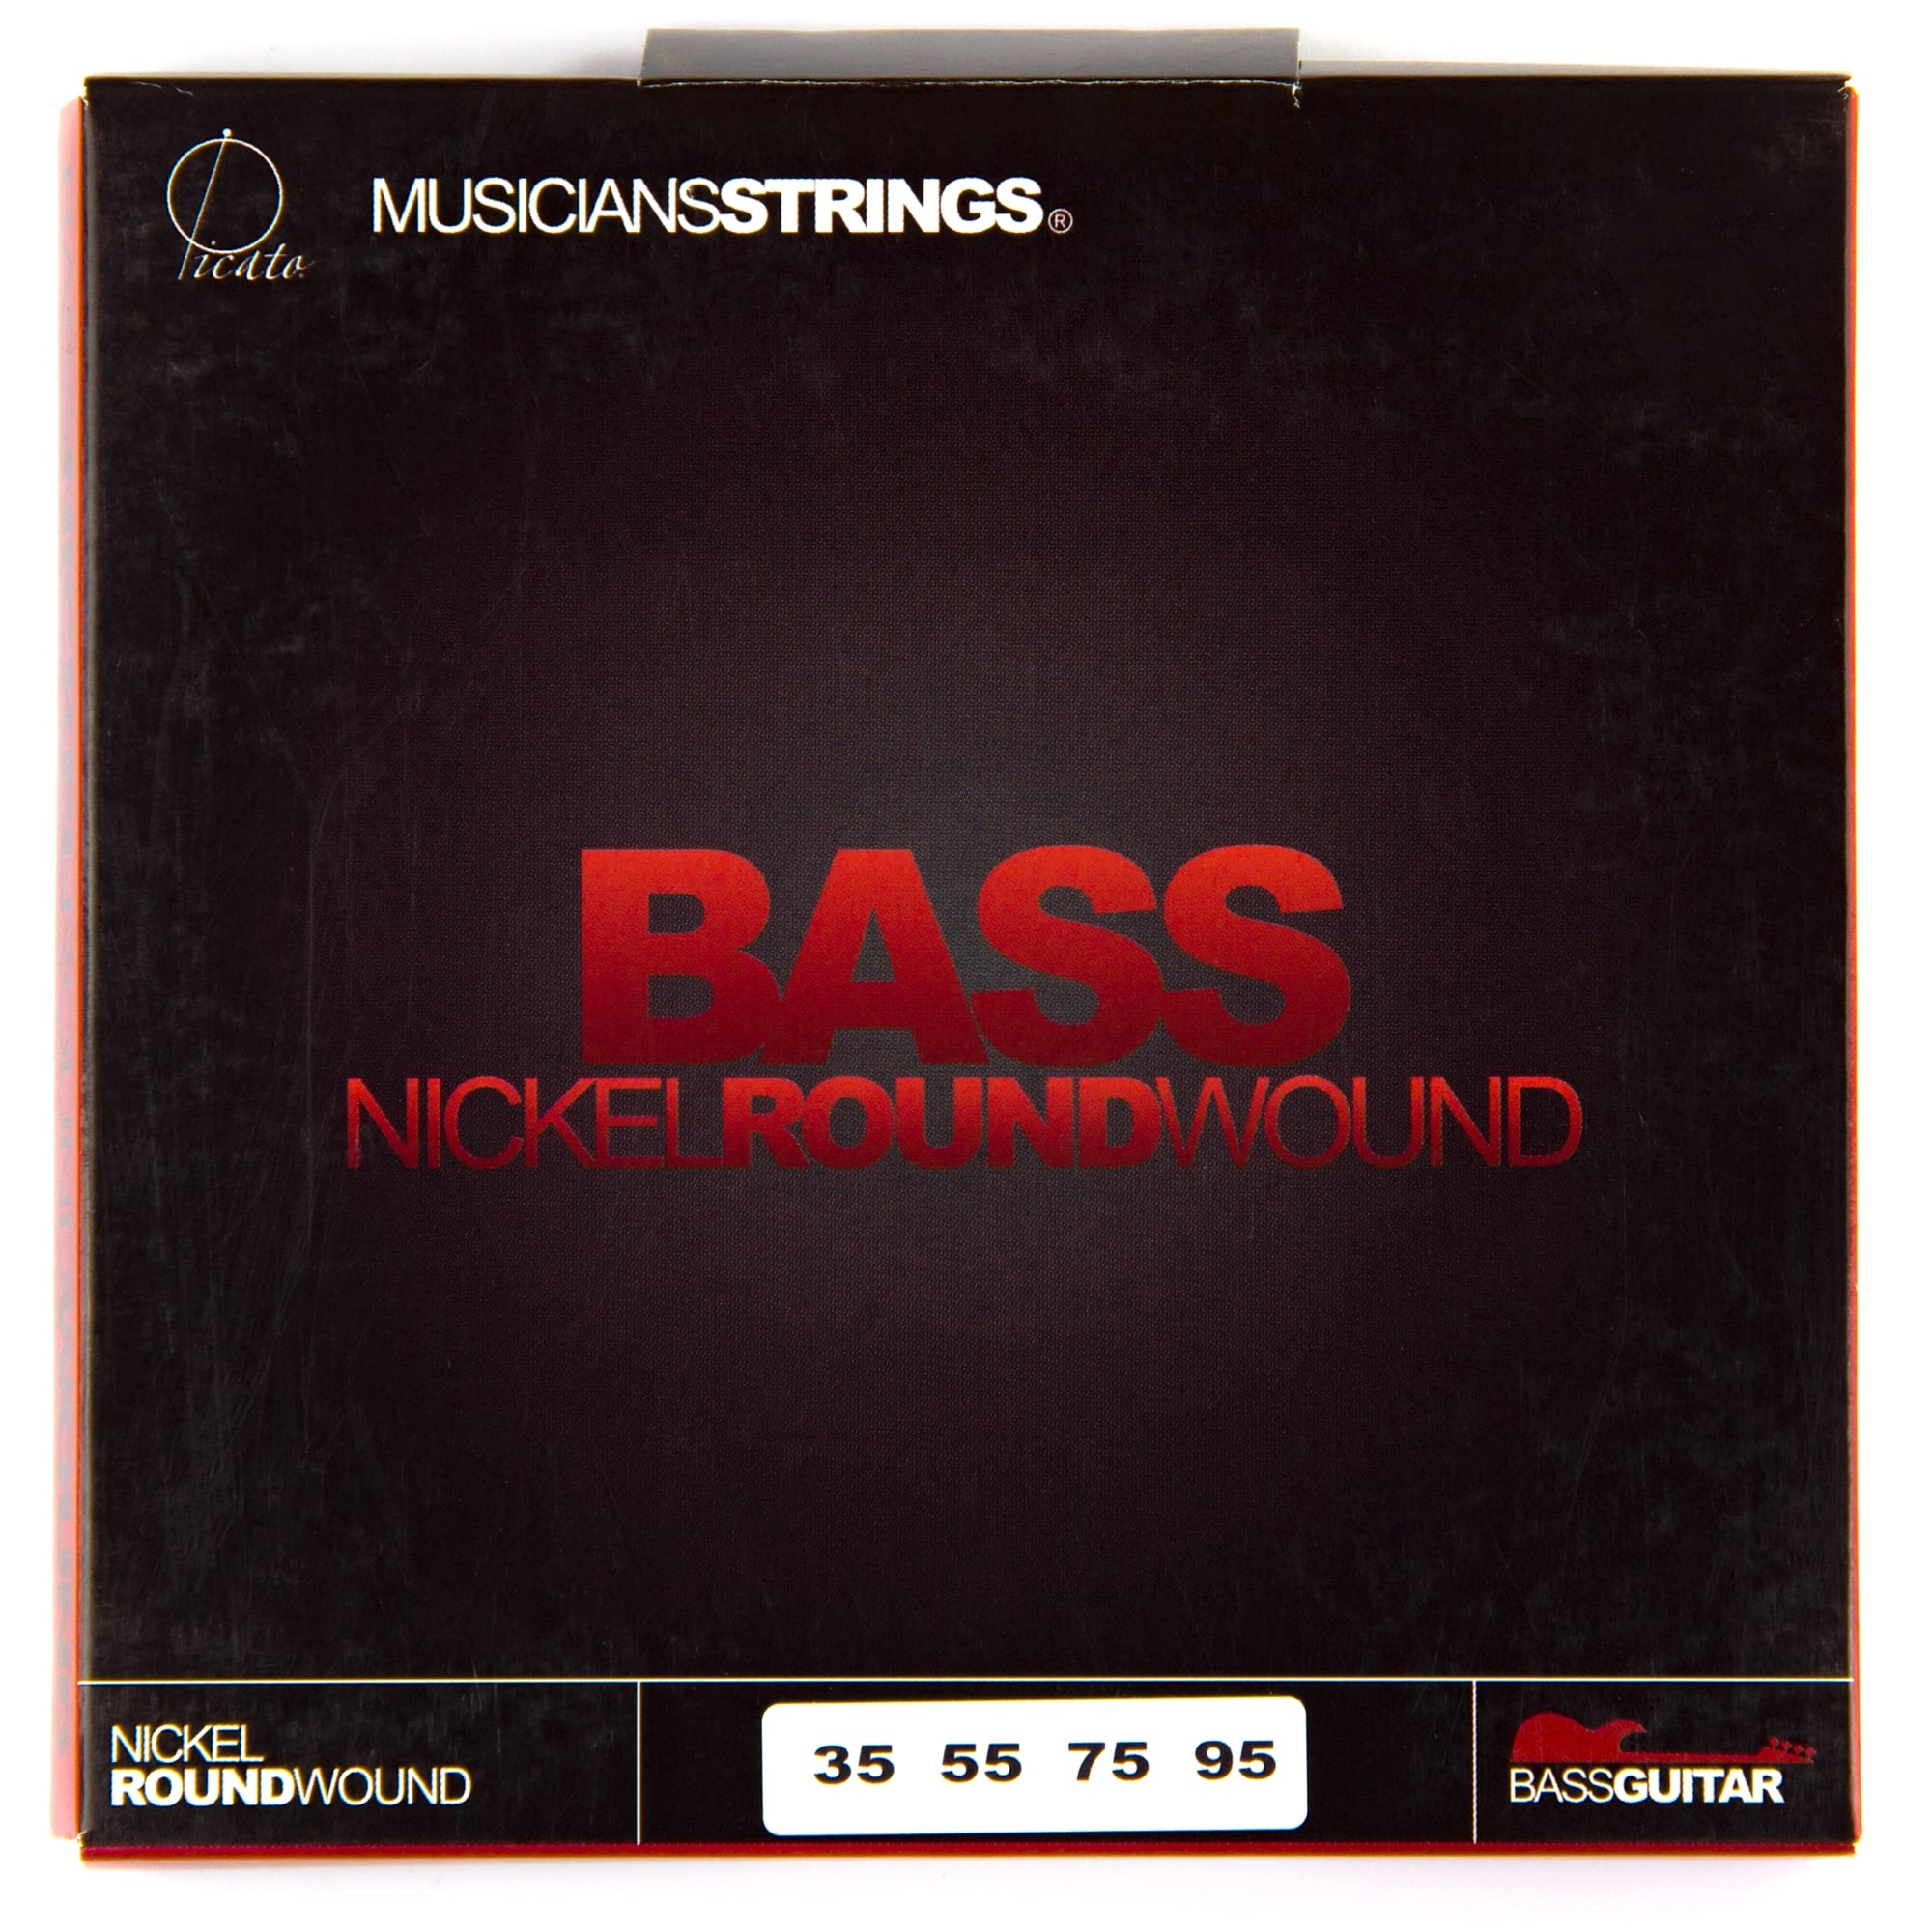 Picato Nickel Roundwound 35-95 Bass Guitar Strings, Long Scale